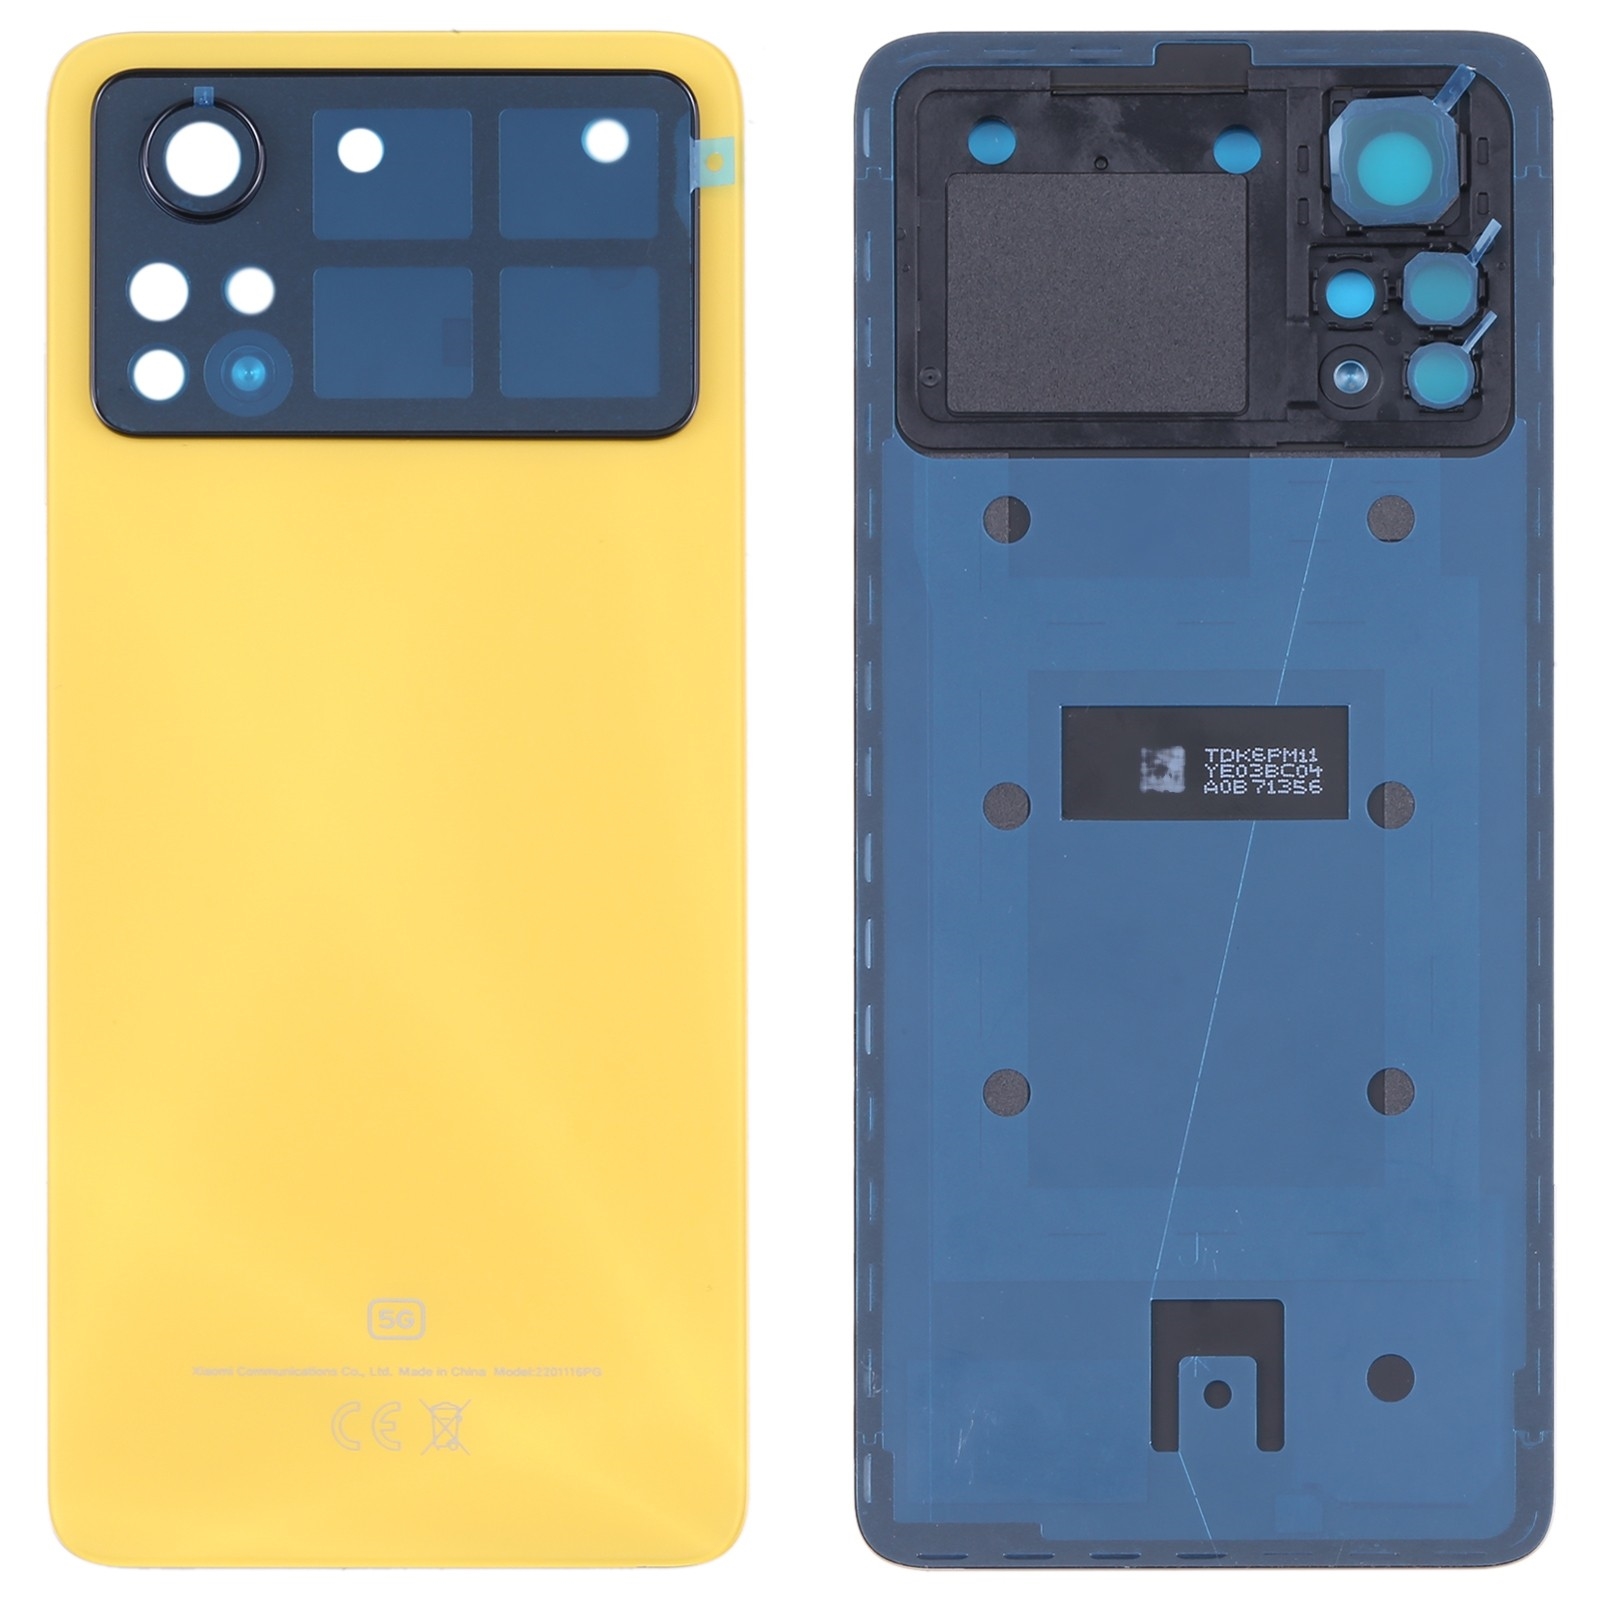 Show products in category BACK BATTERY COVER